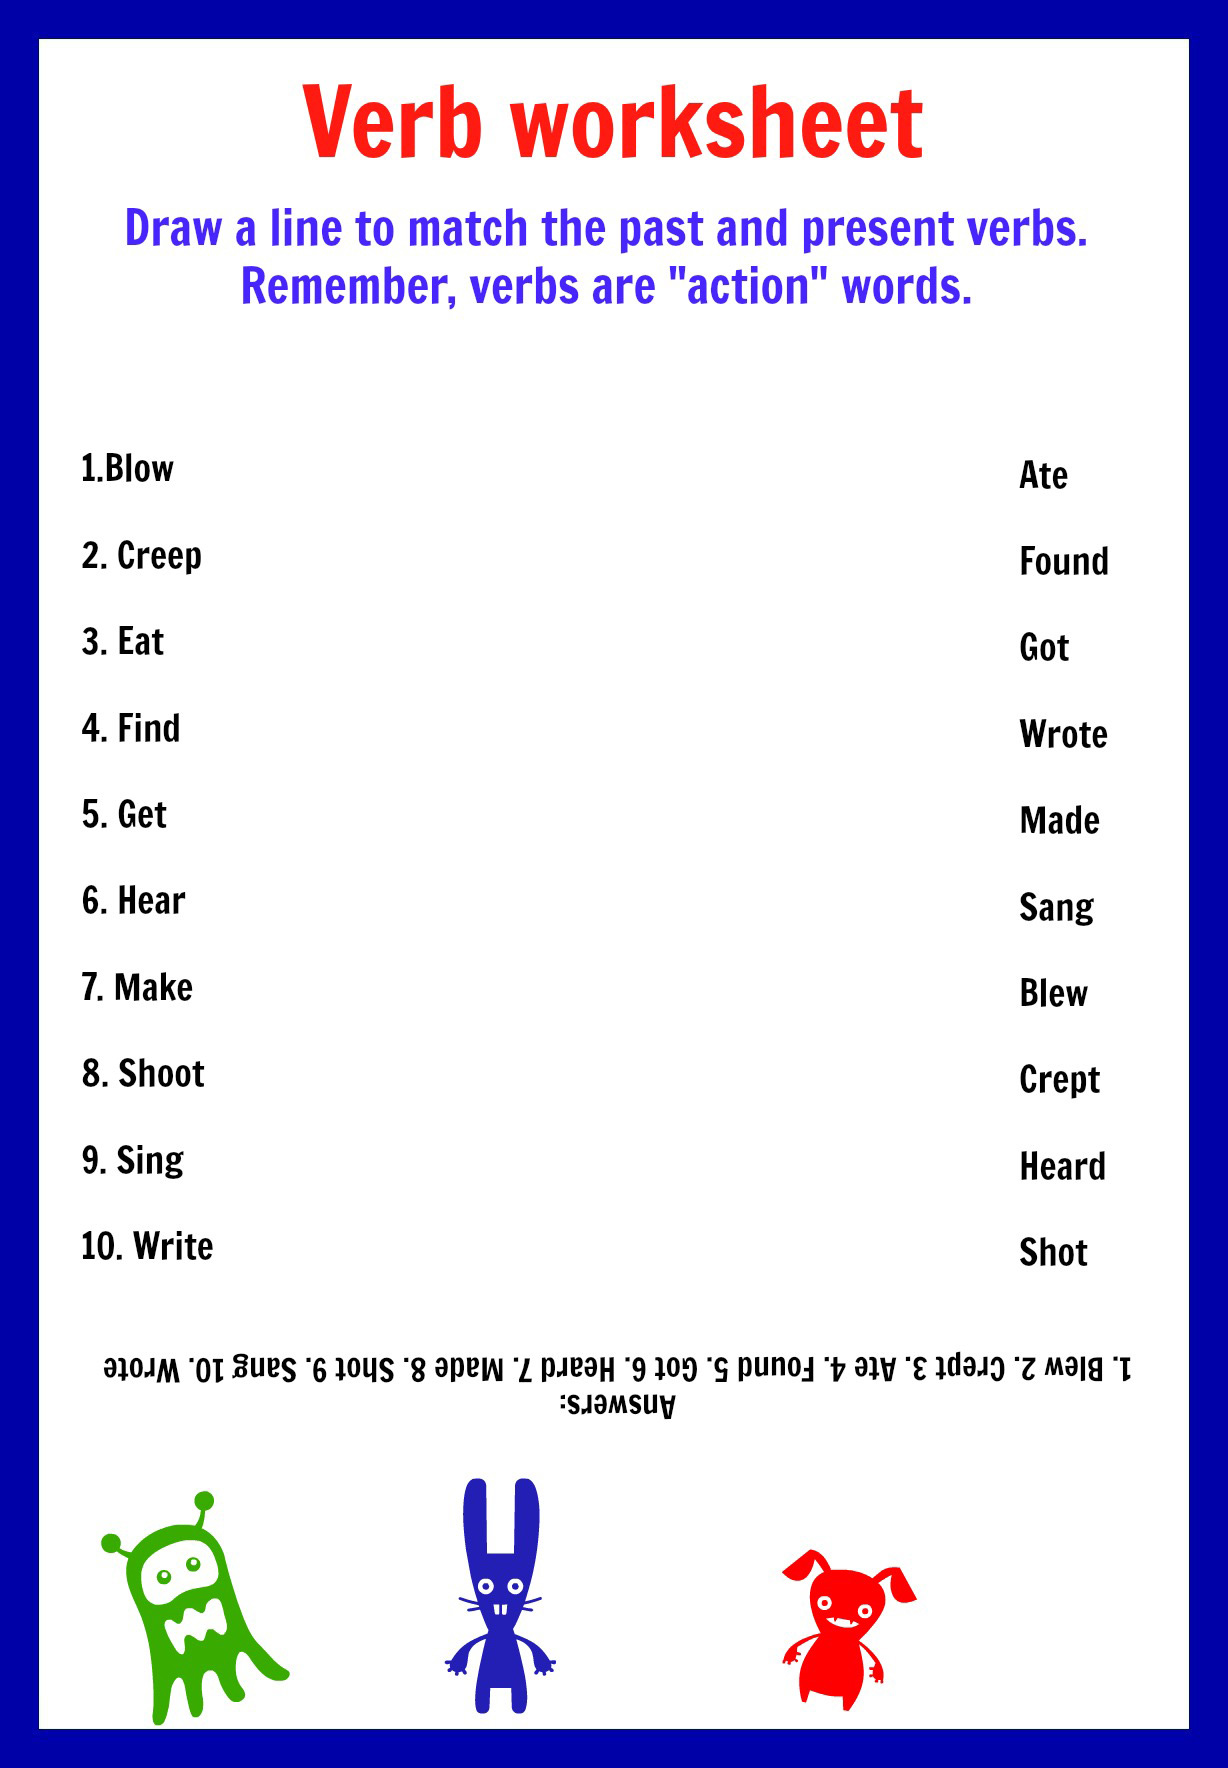 verbs-printable-worksheets-linking-verb-or-action-verb-youtube